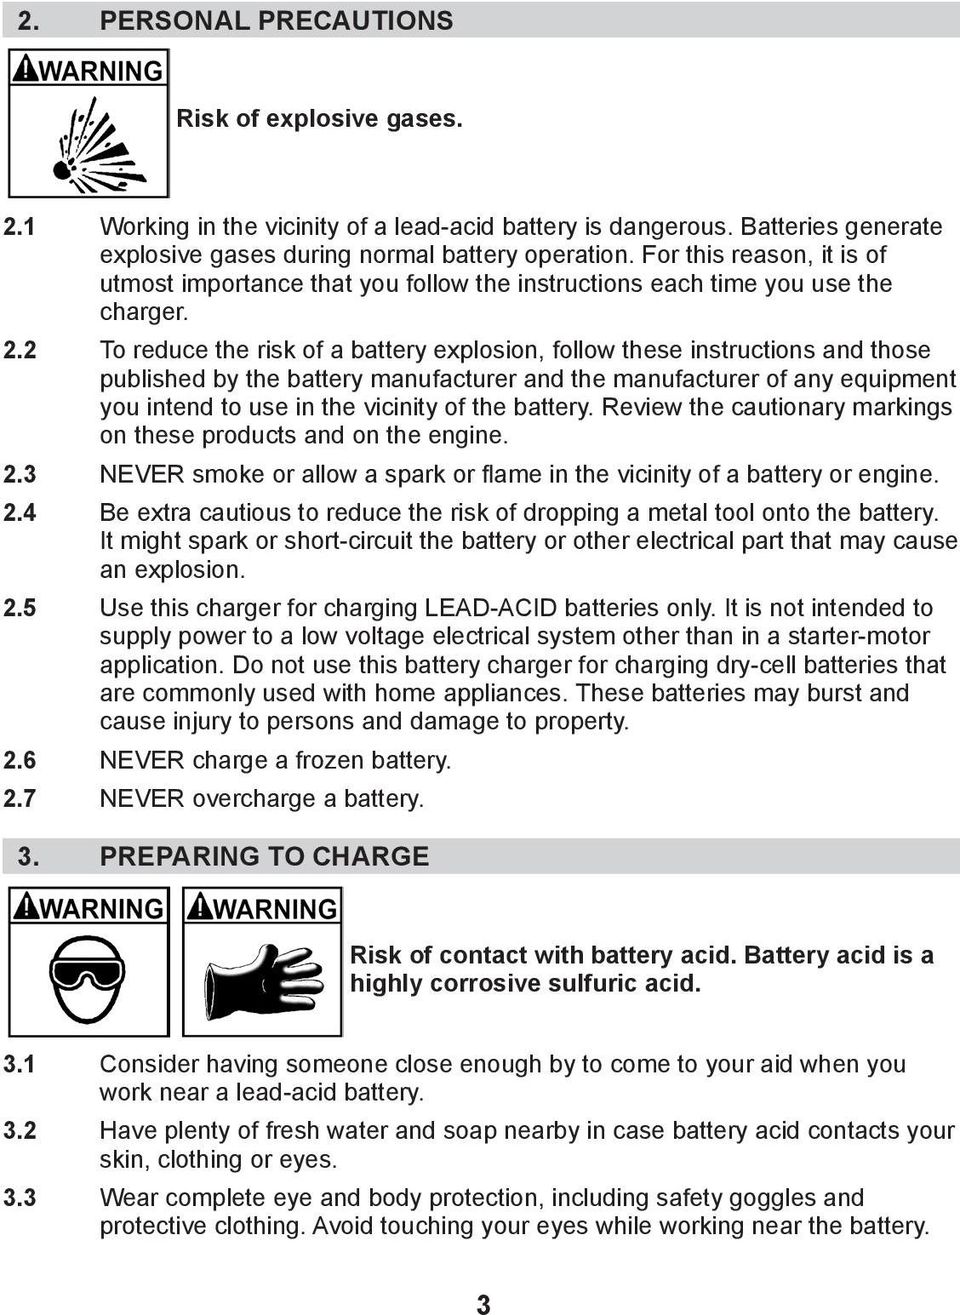 To reduce the risk of a battery explosion, follow these instructions and those published by the battery manufacturer and the manufacturer of any equipment you intend to use in the vicinity of the